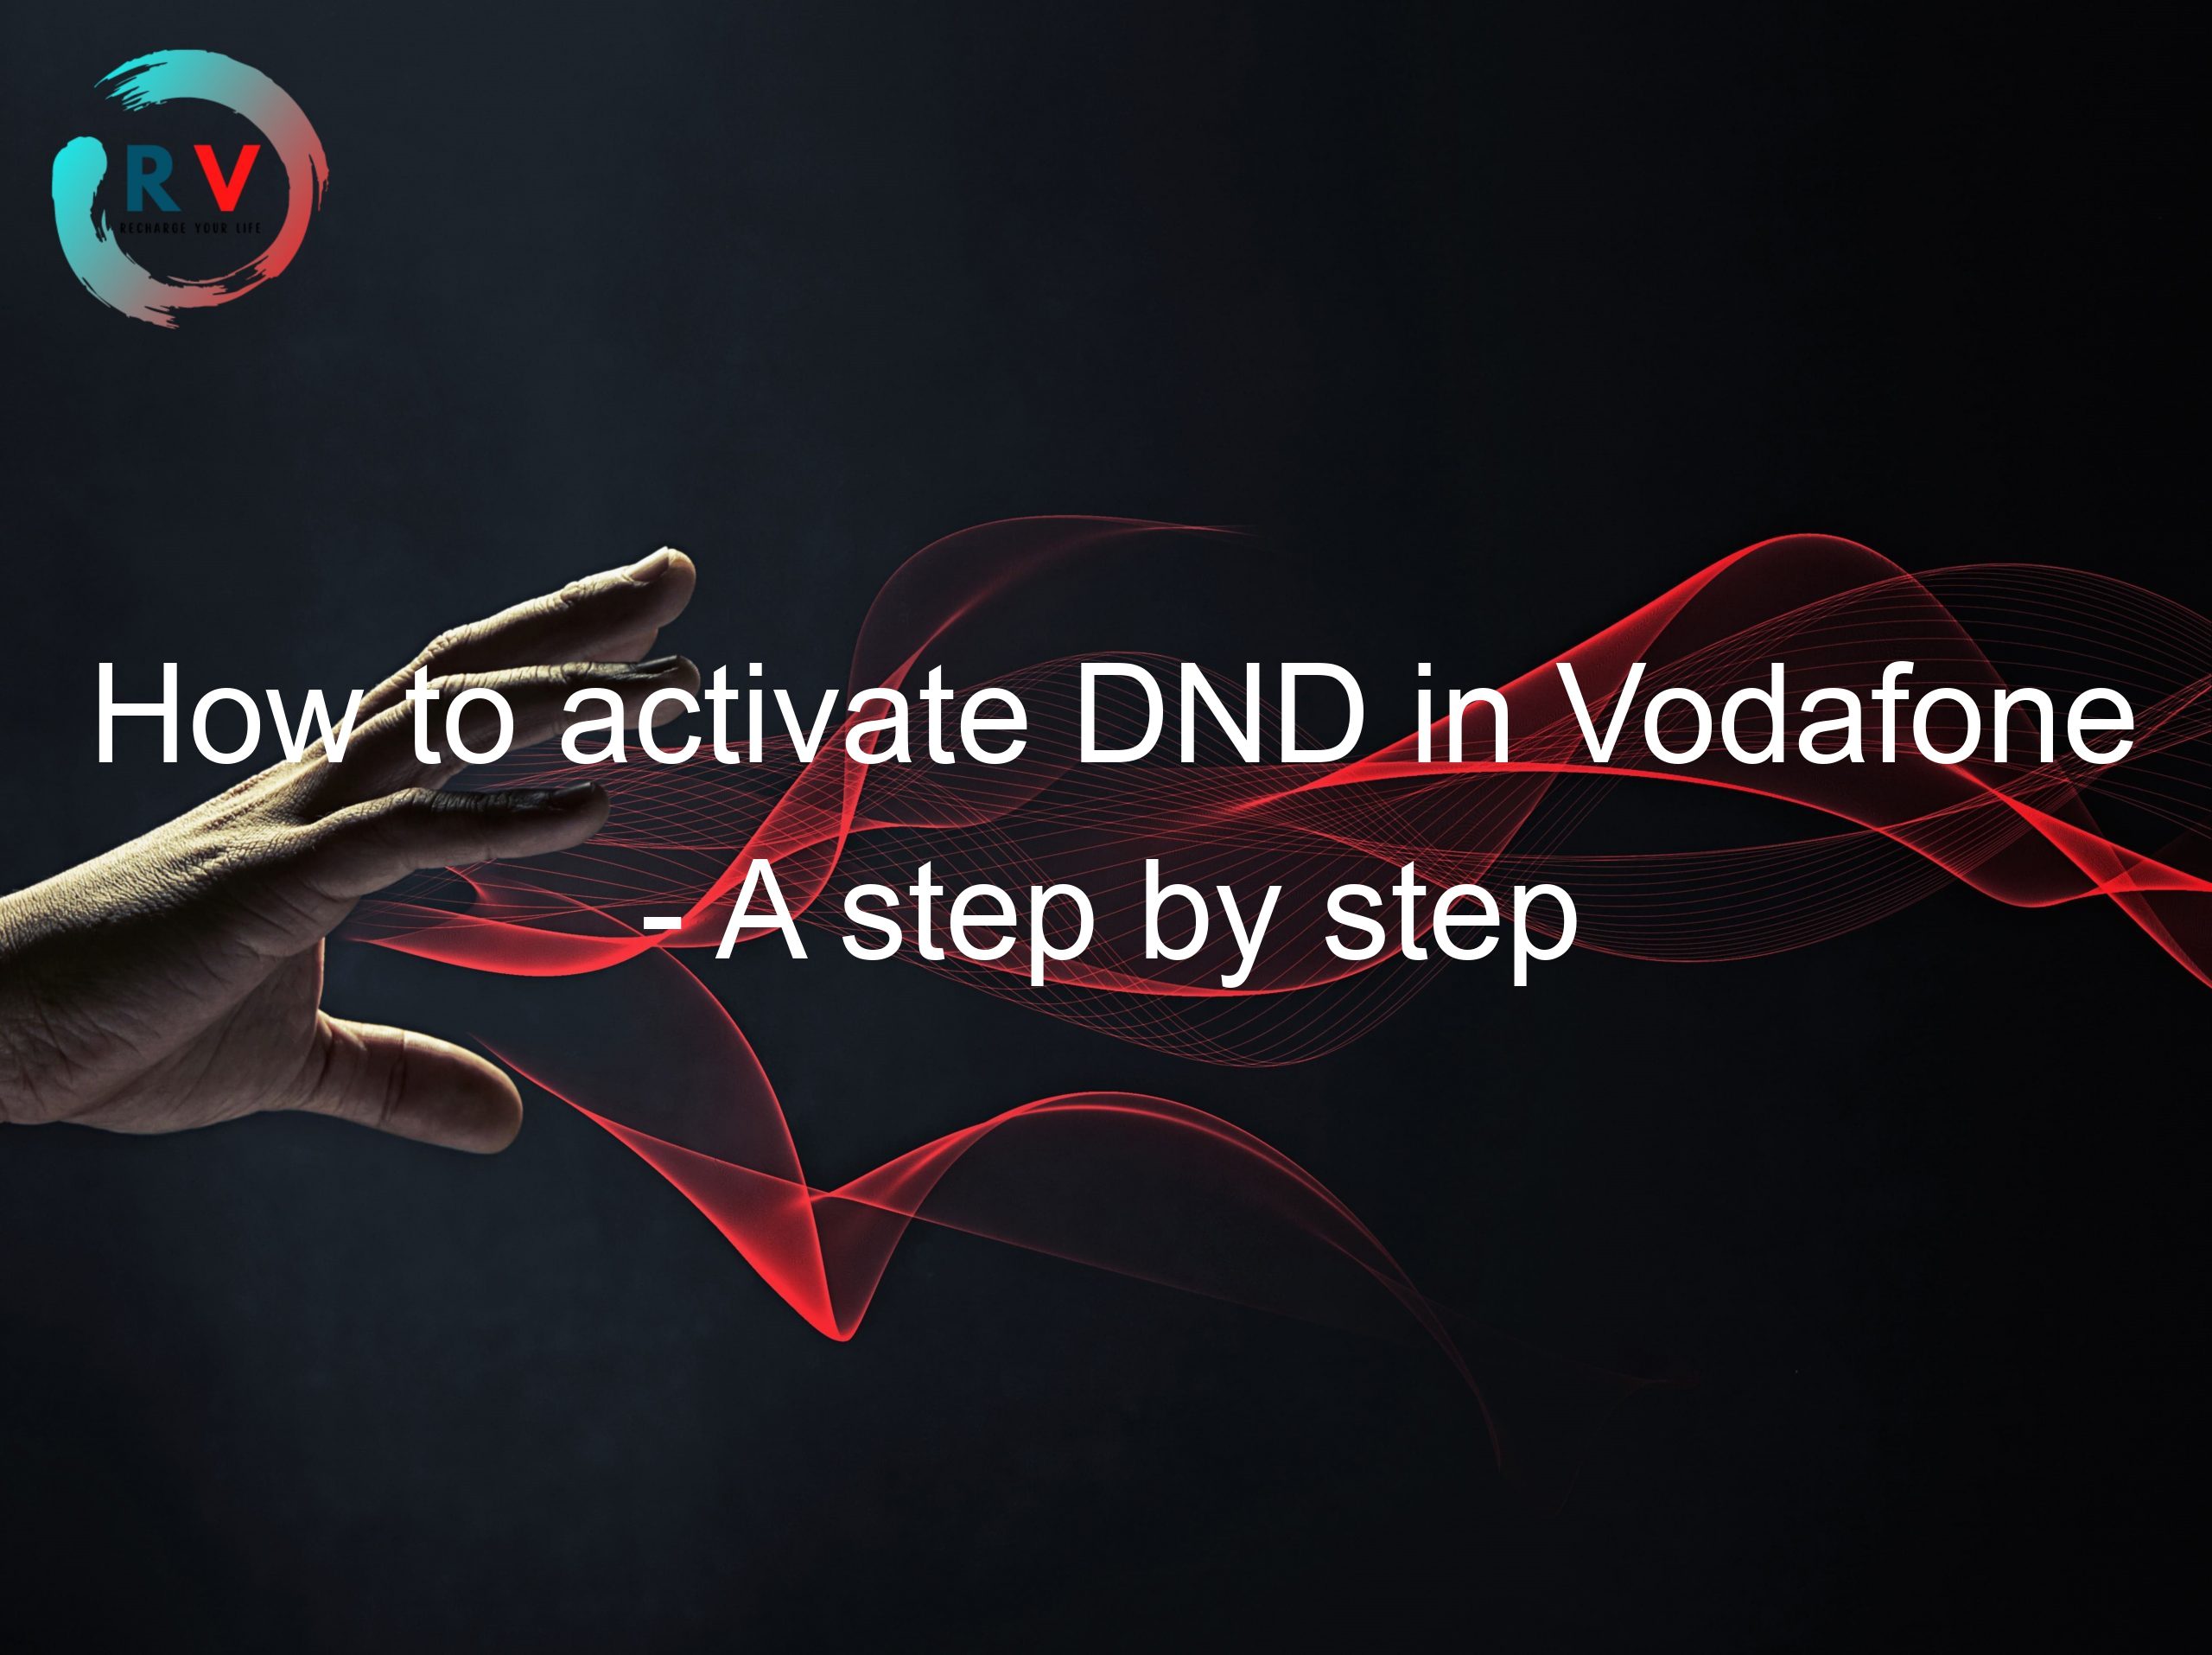 How to activate DND in Vodafone - A step by step guide